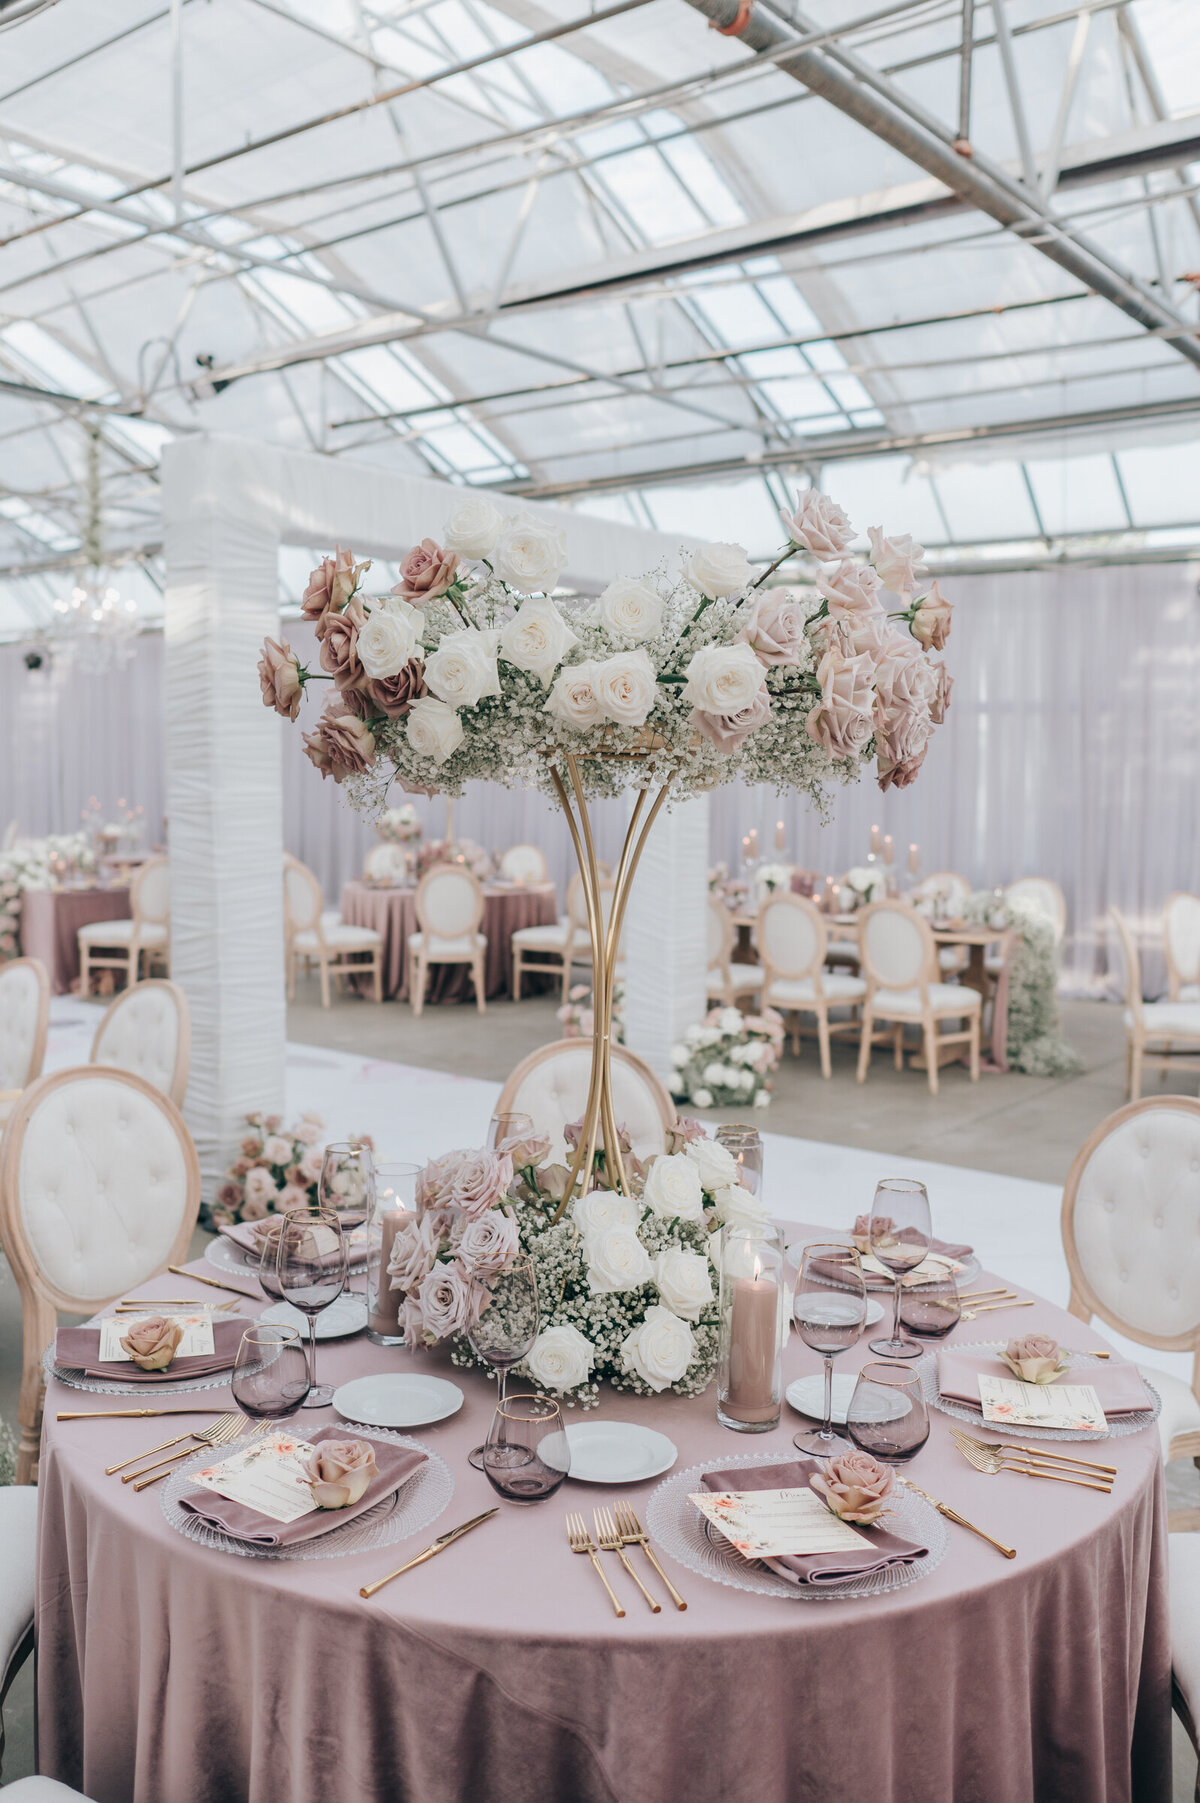 Glamorous wedding centre pieces with white and pink roses and gold accents